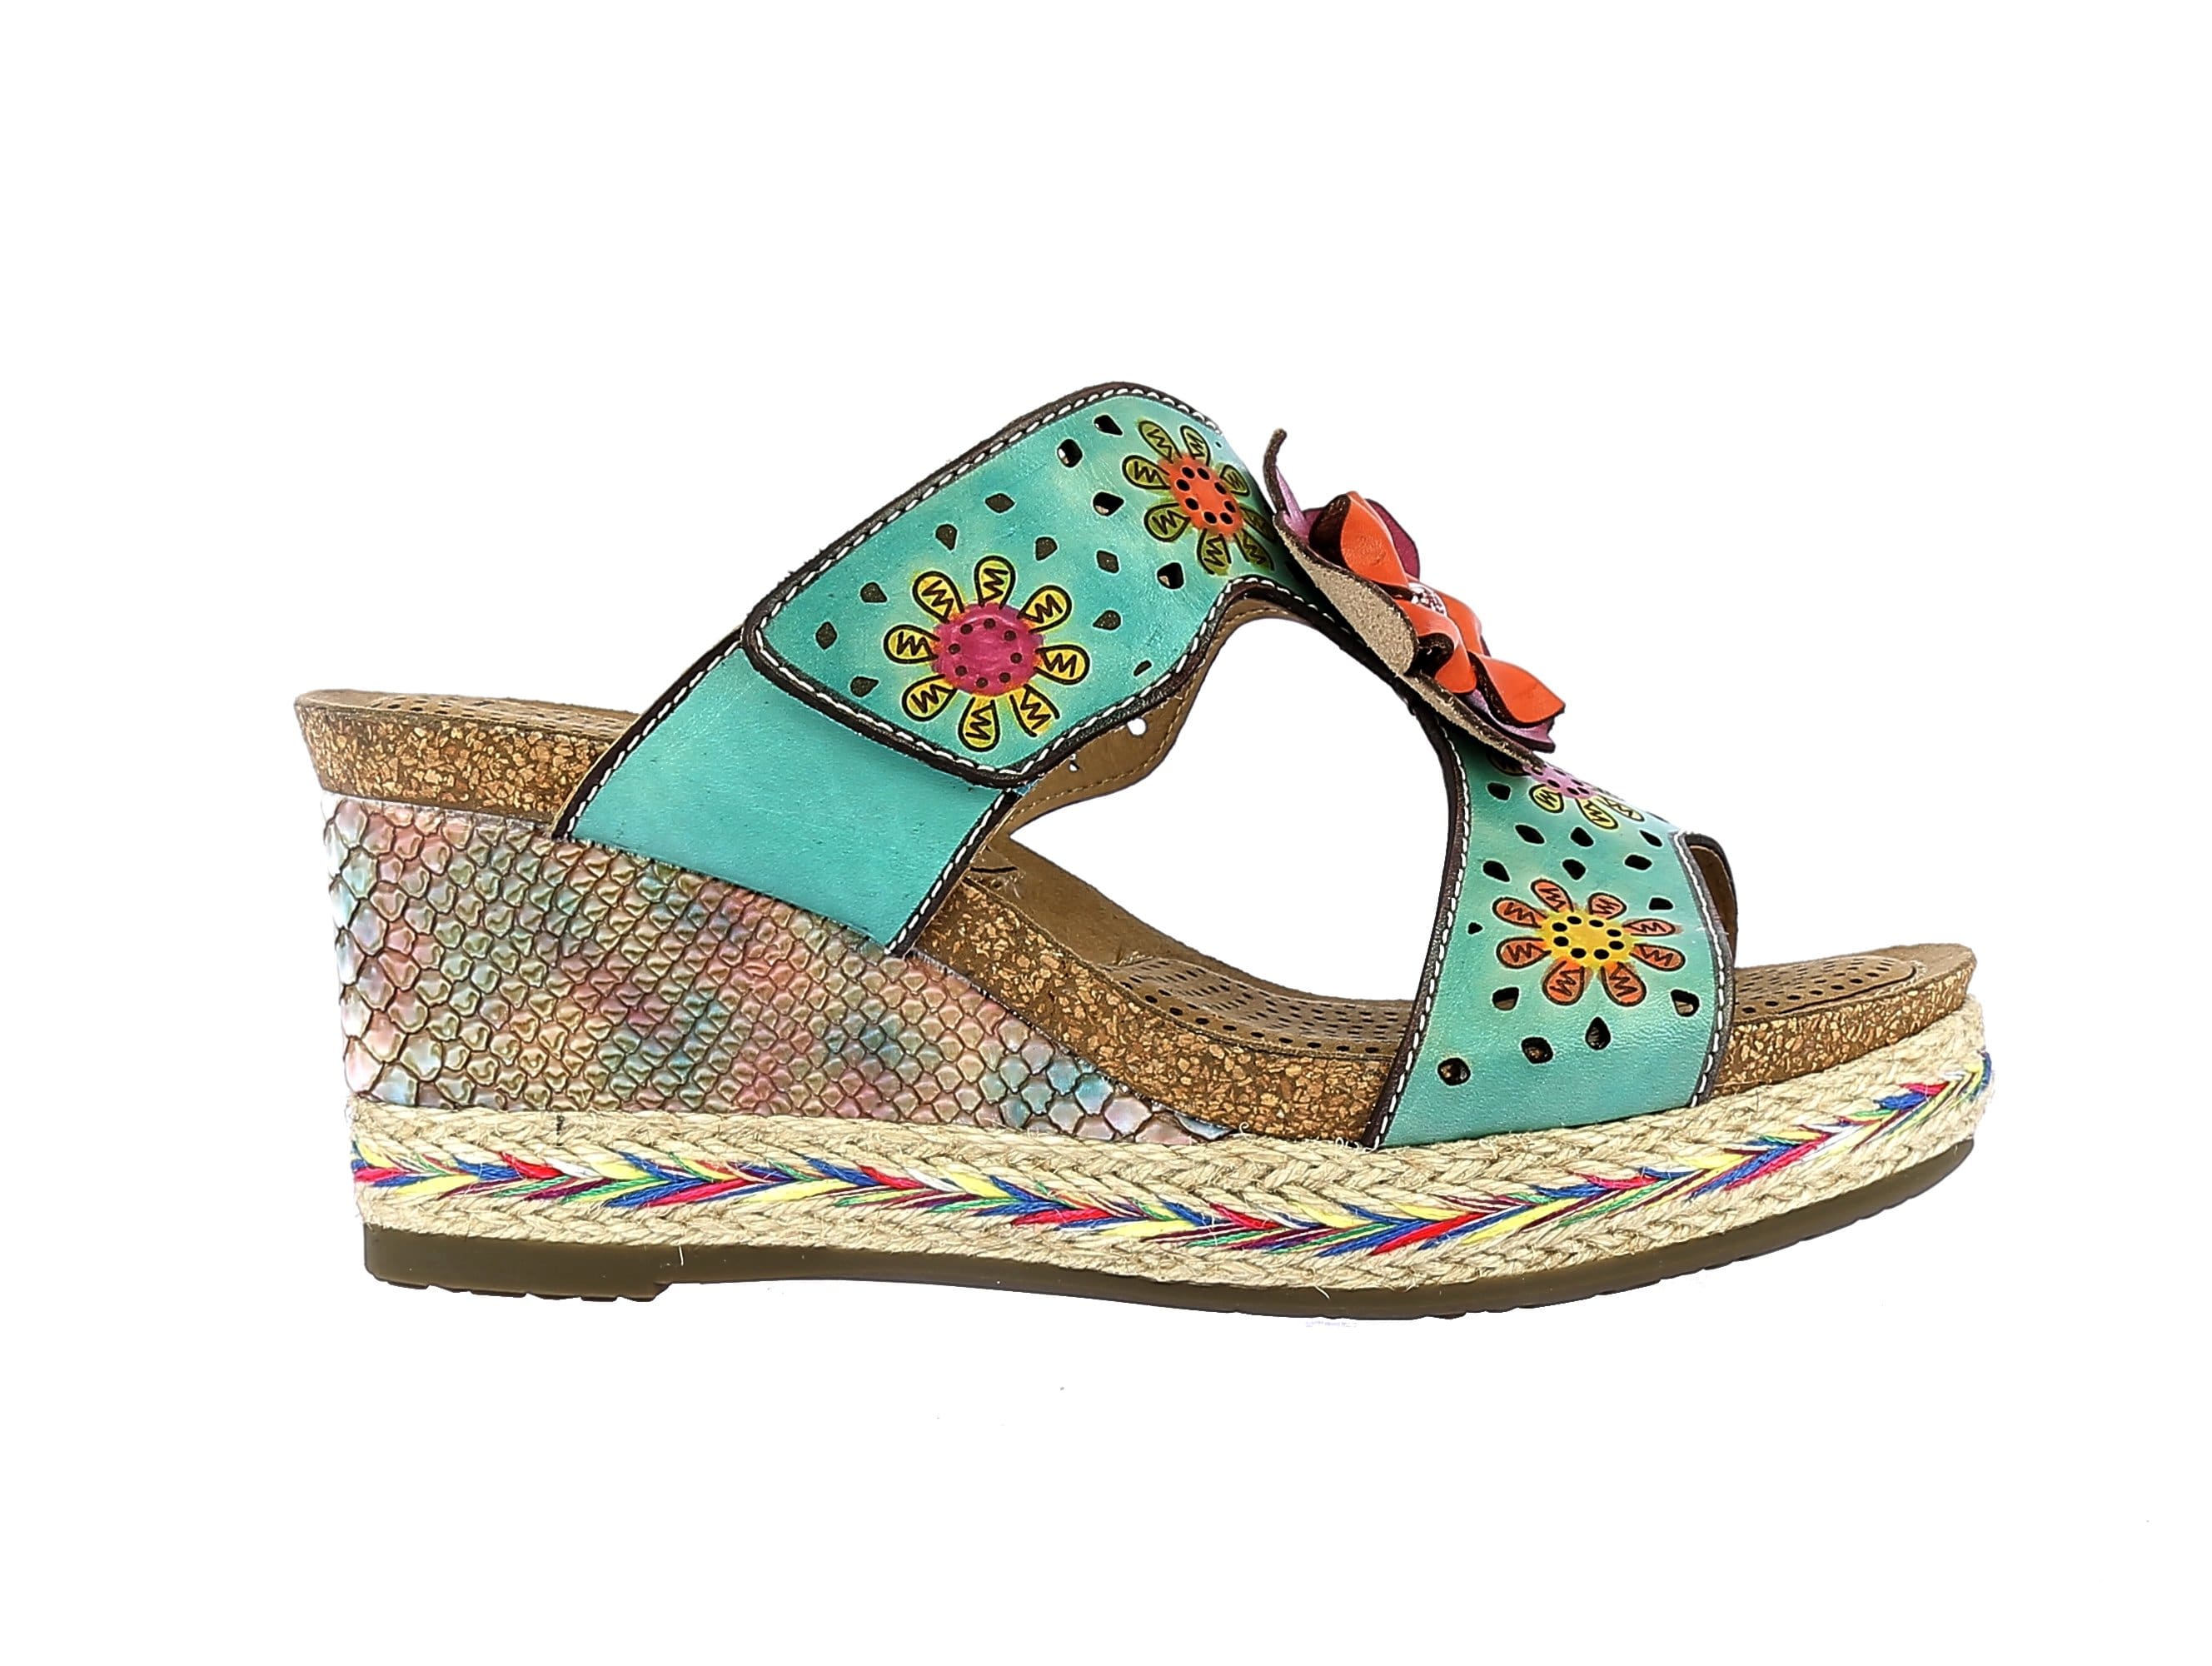 FACYO shoes 10 - 35 / TURQUOISE - Mule